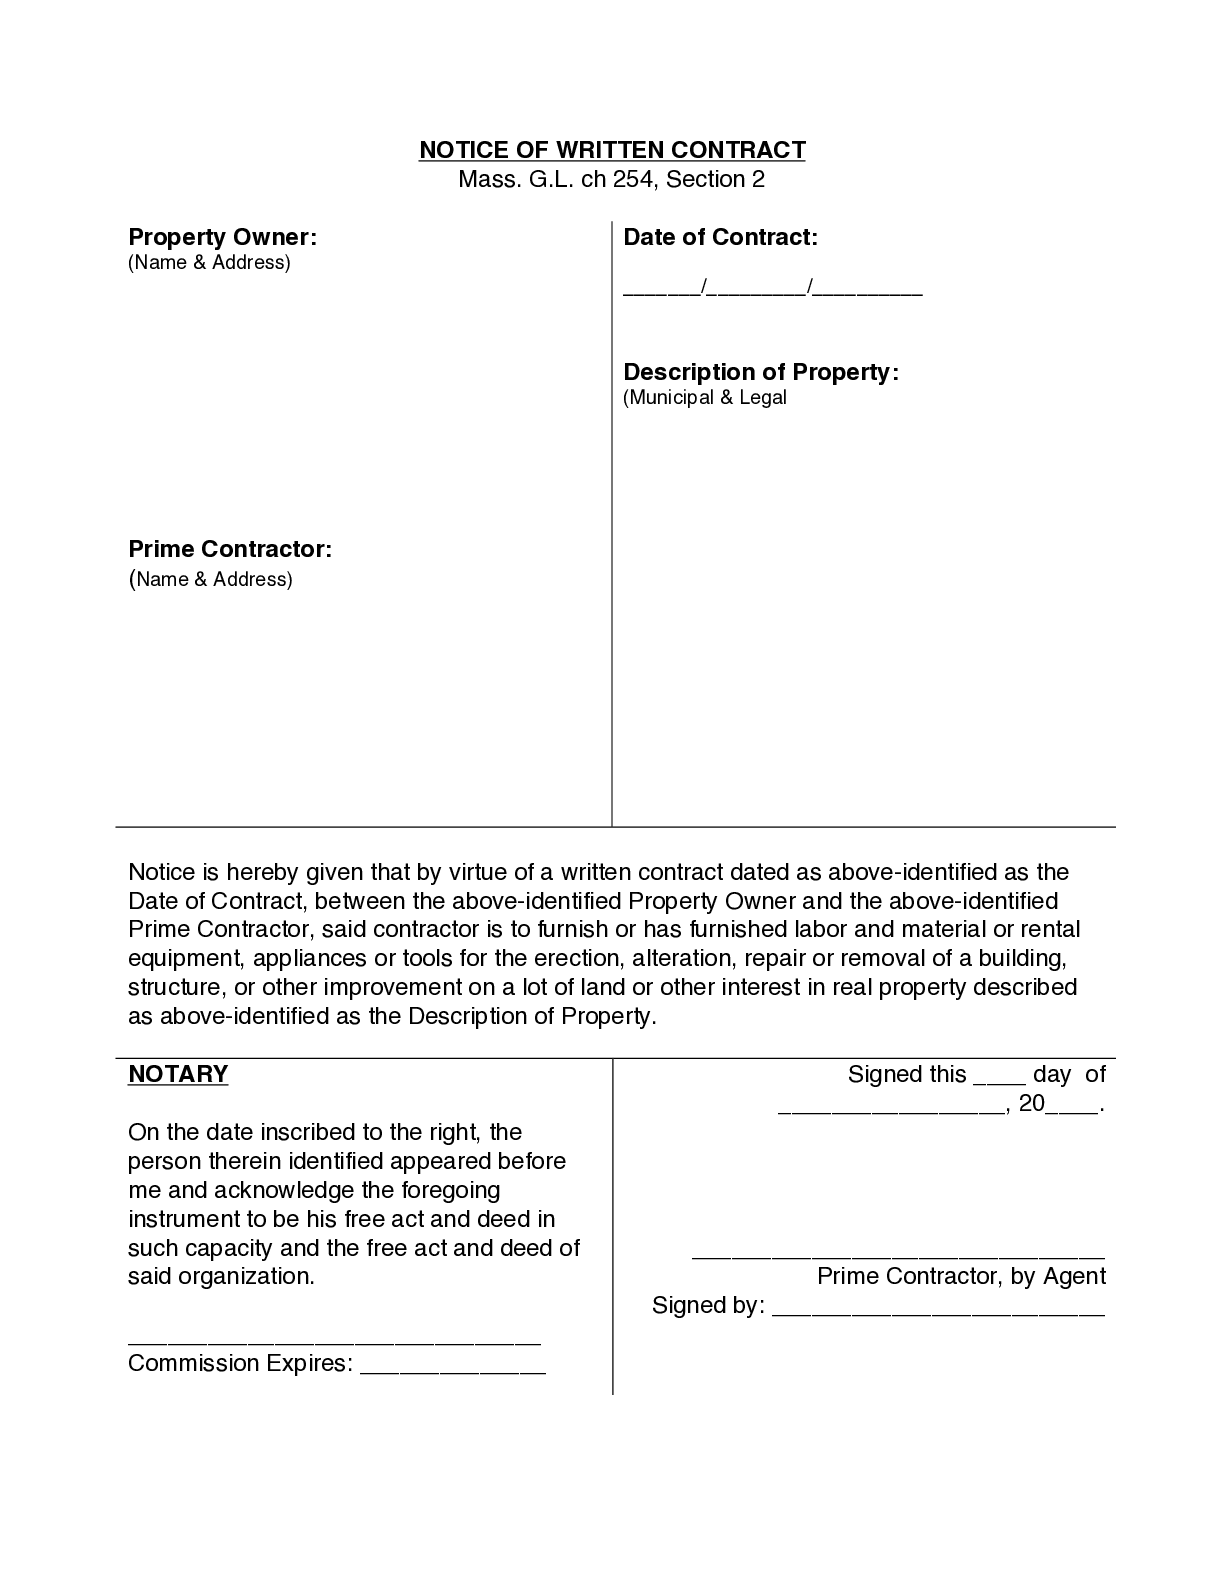 Massachusetts Notice of Written Contract Form - free from